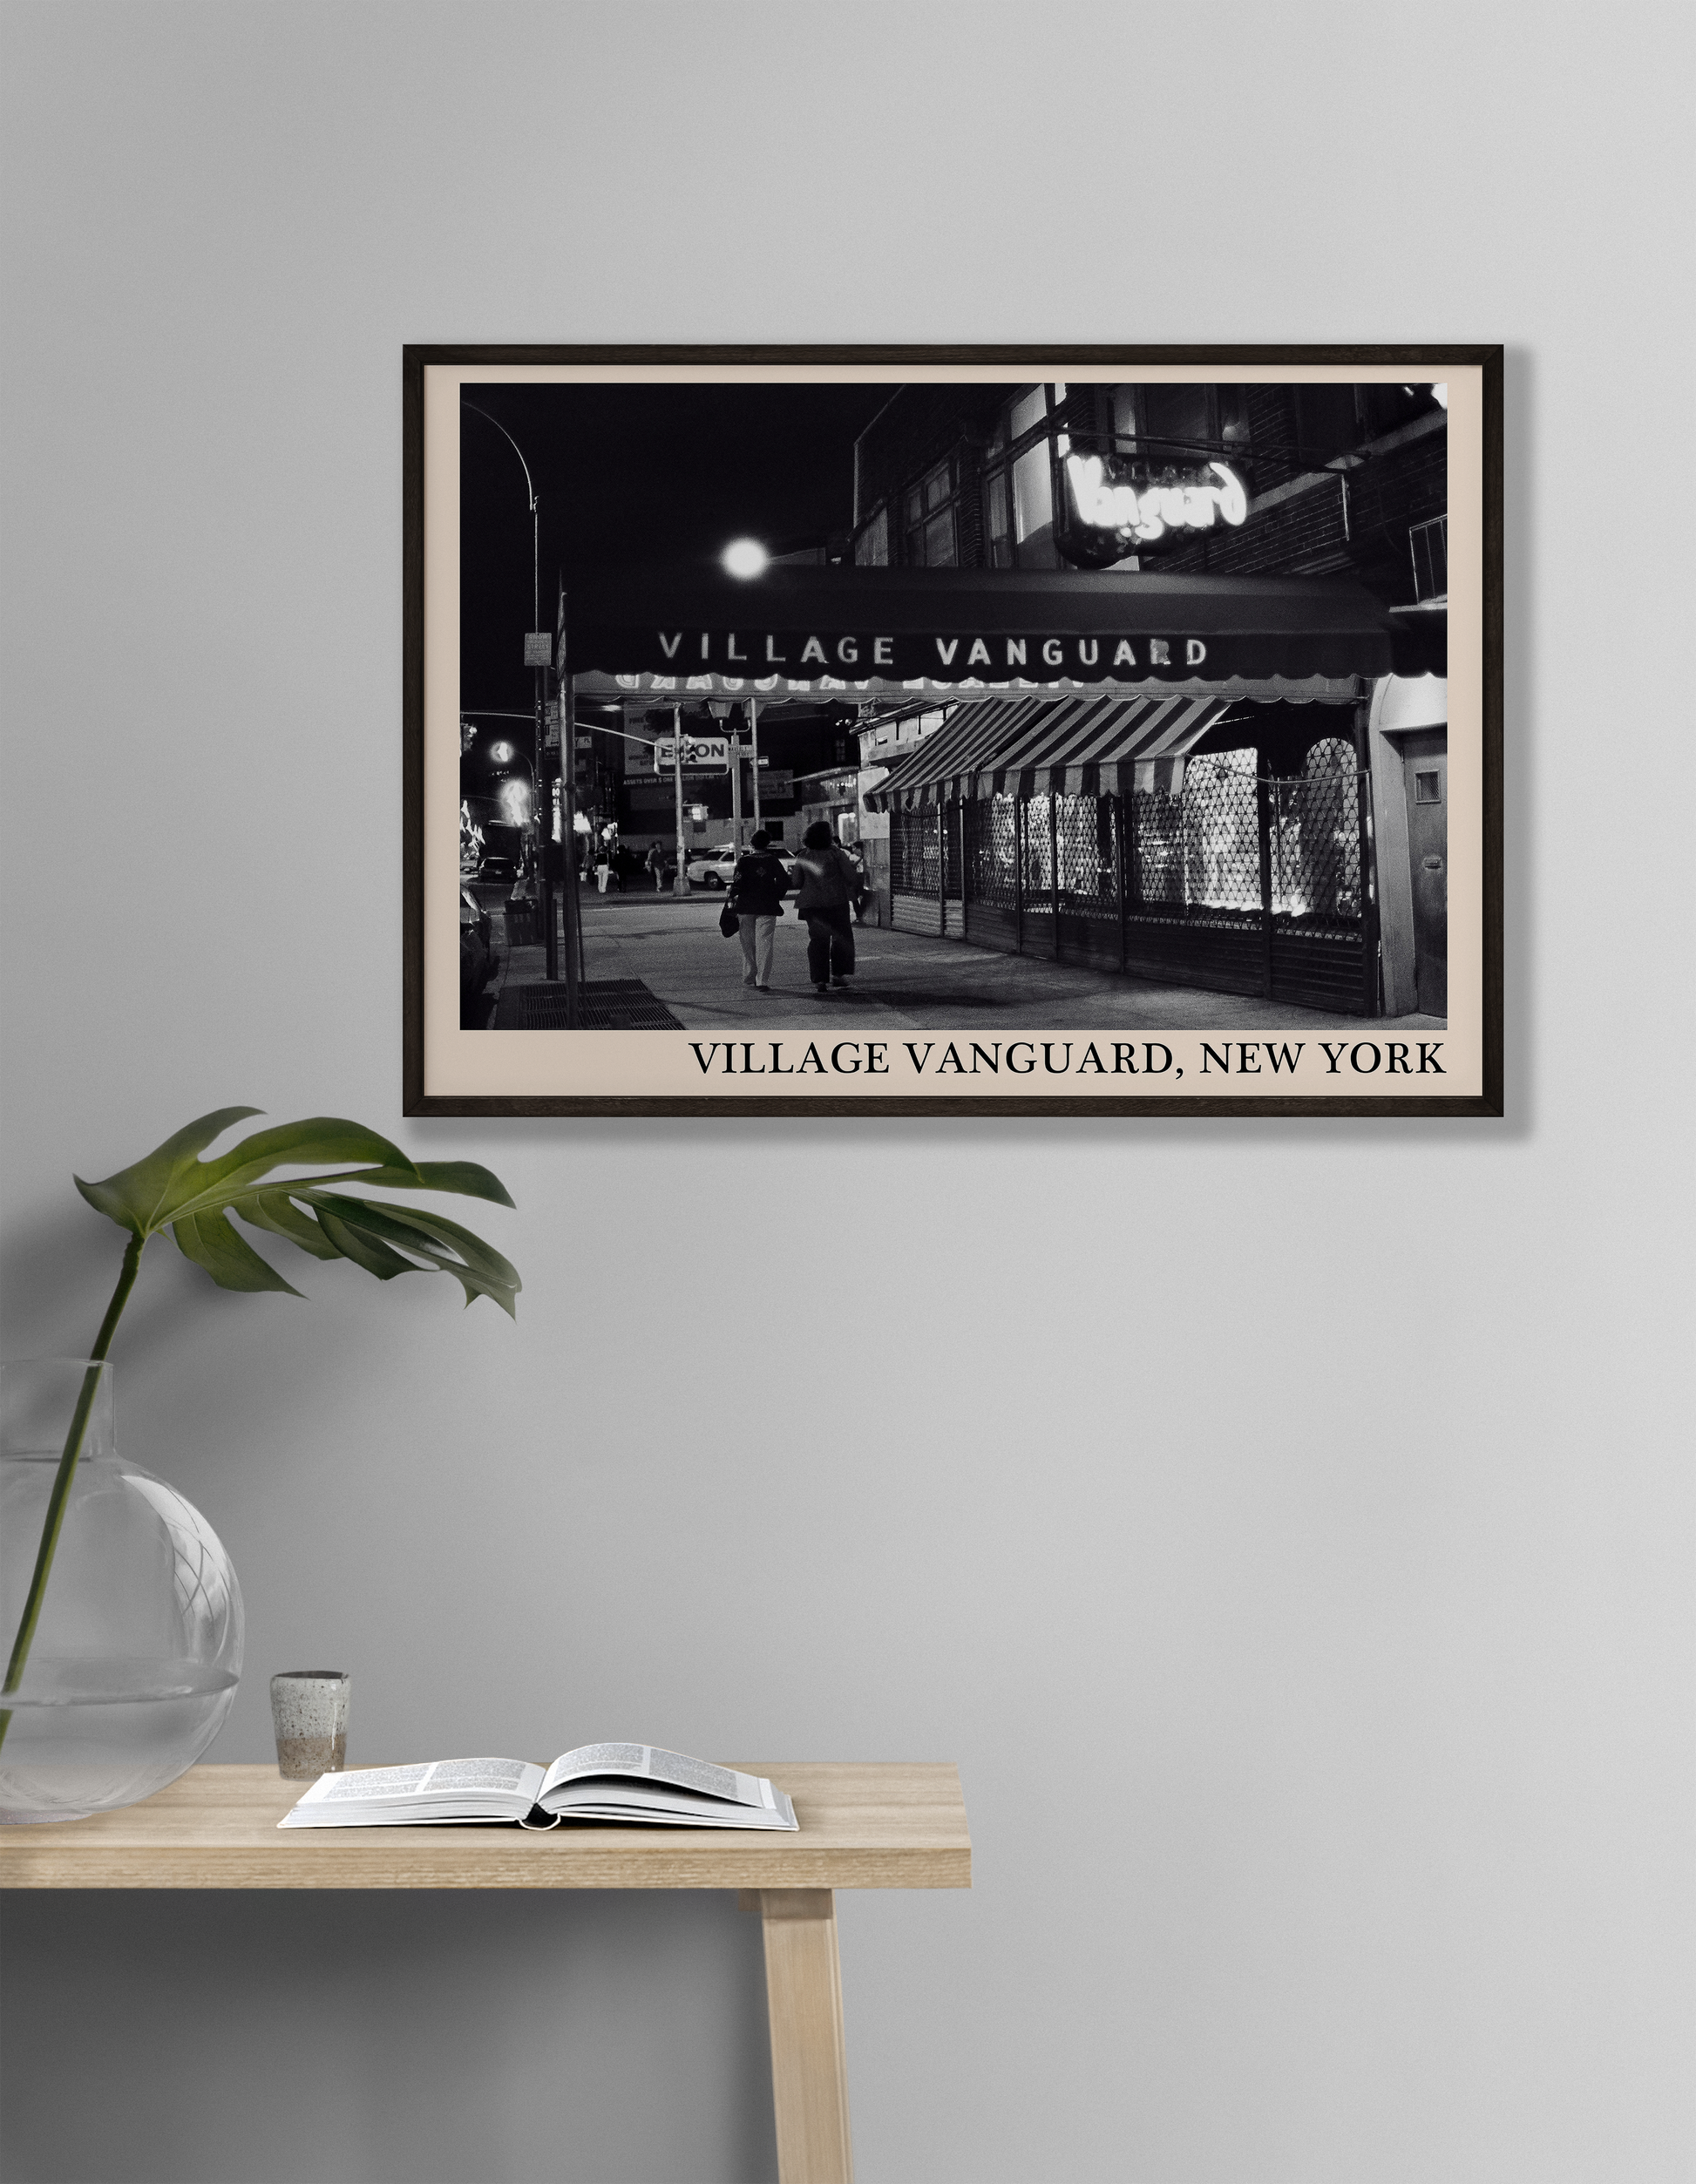 Iconic photo of Village Vanguard in New York taken by Thomas Marcello and captured in a retro black framed jazz print, hanging on an off-white living room wall